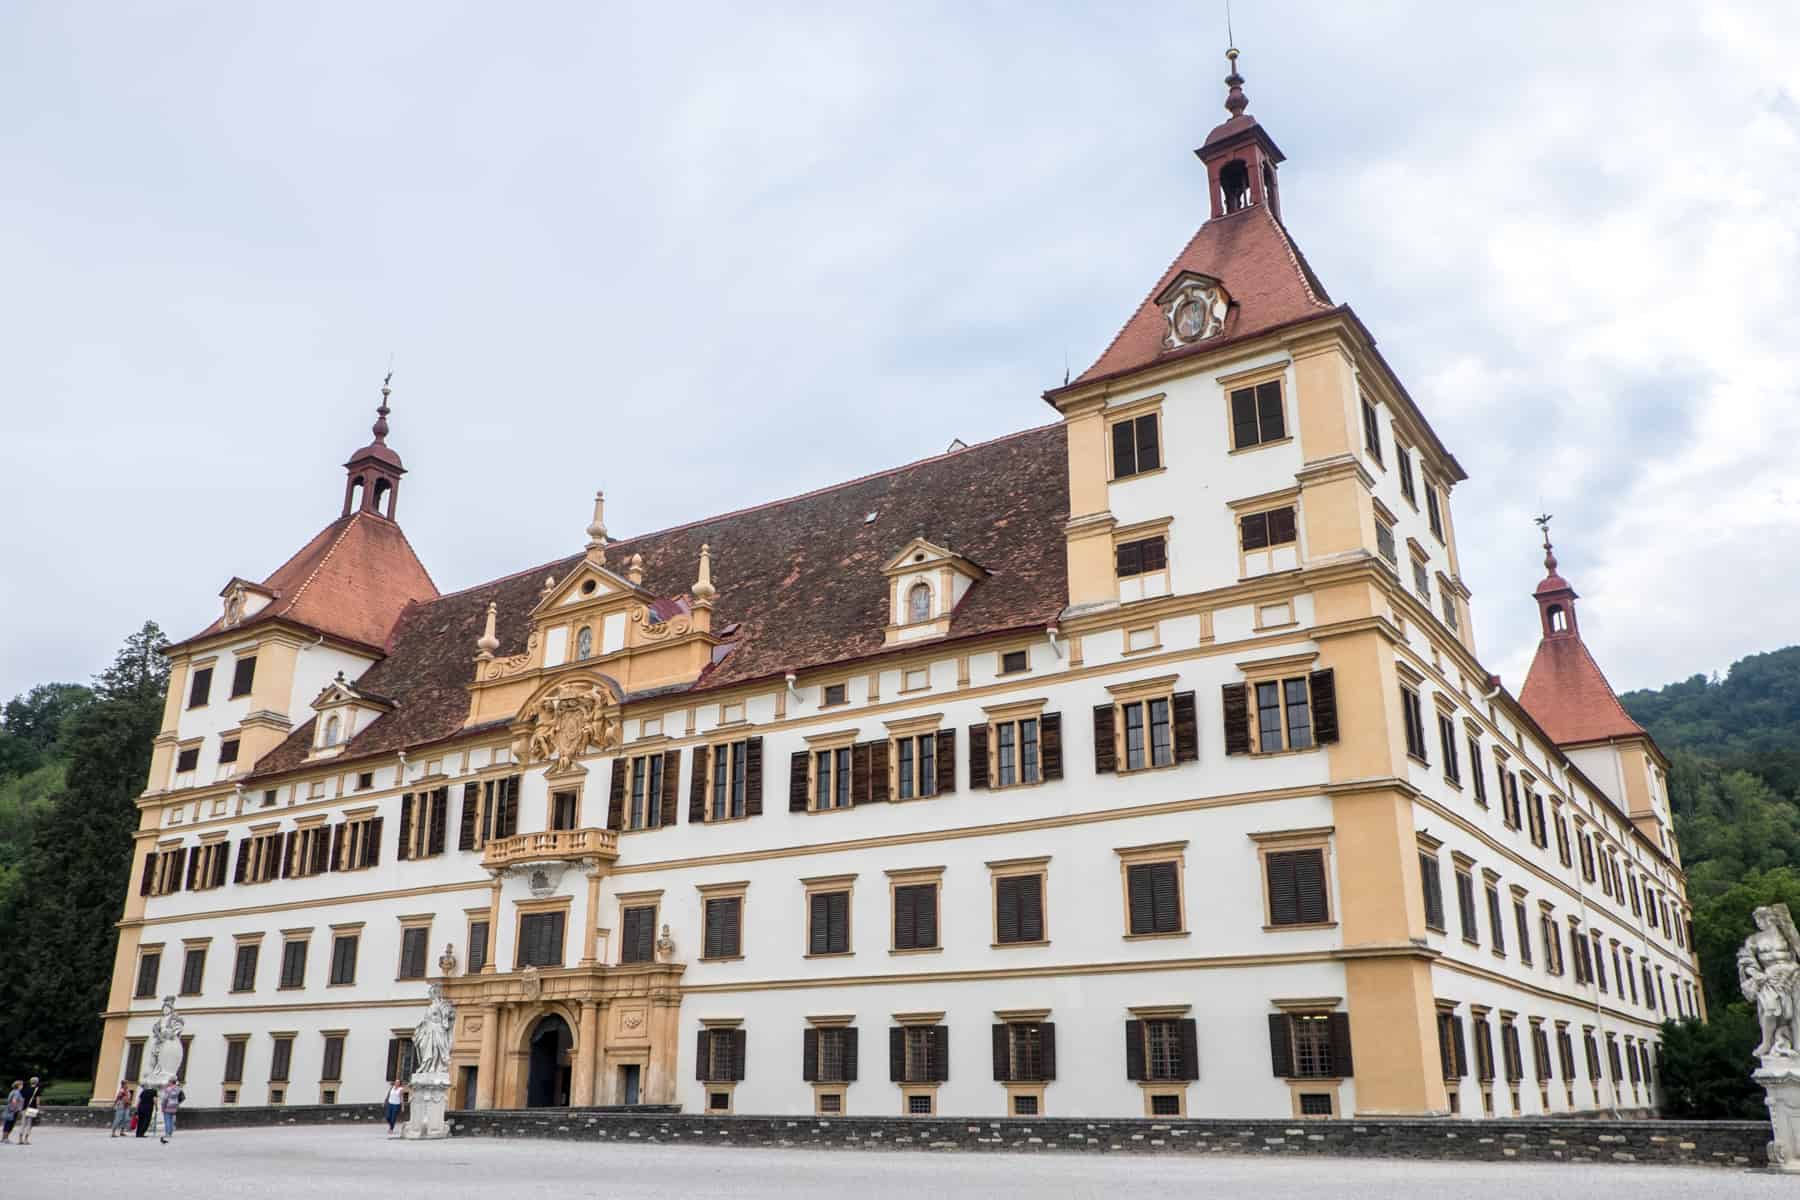 The four towers, white and yellow building with a deep red roof of Schloss Eggenberg Palace in Graz, Austria